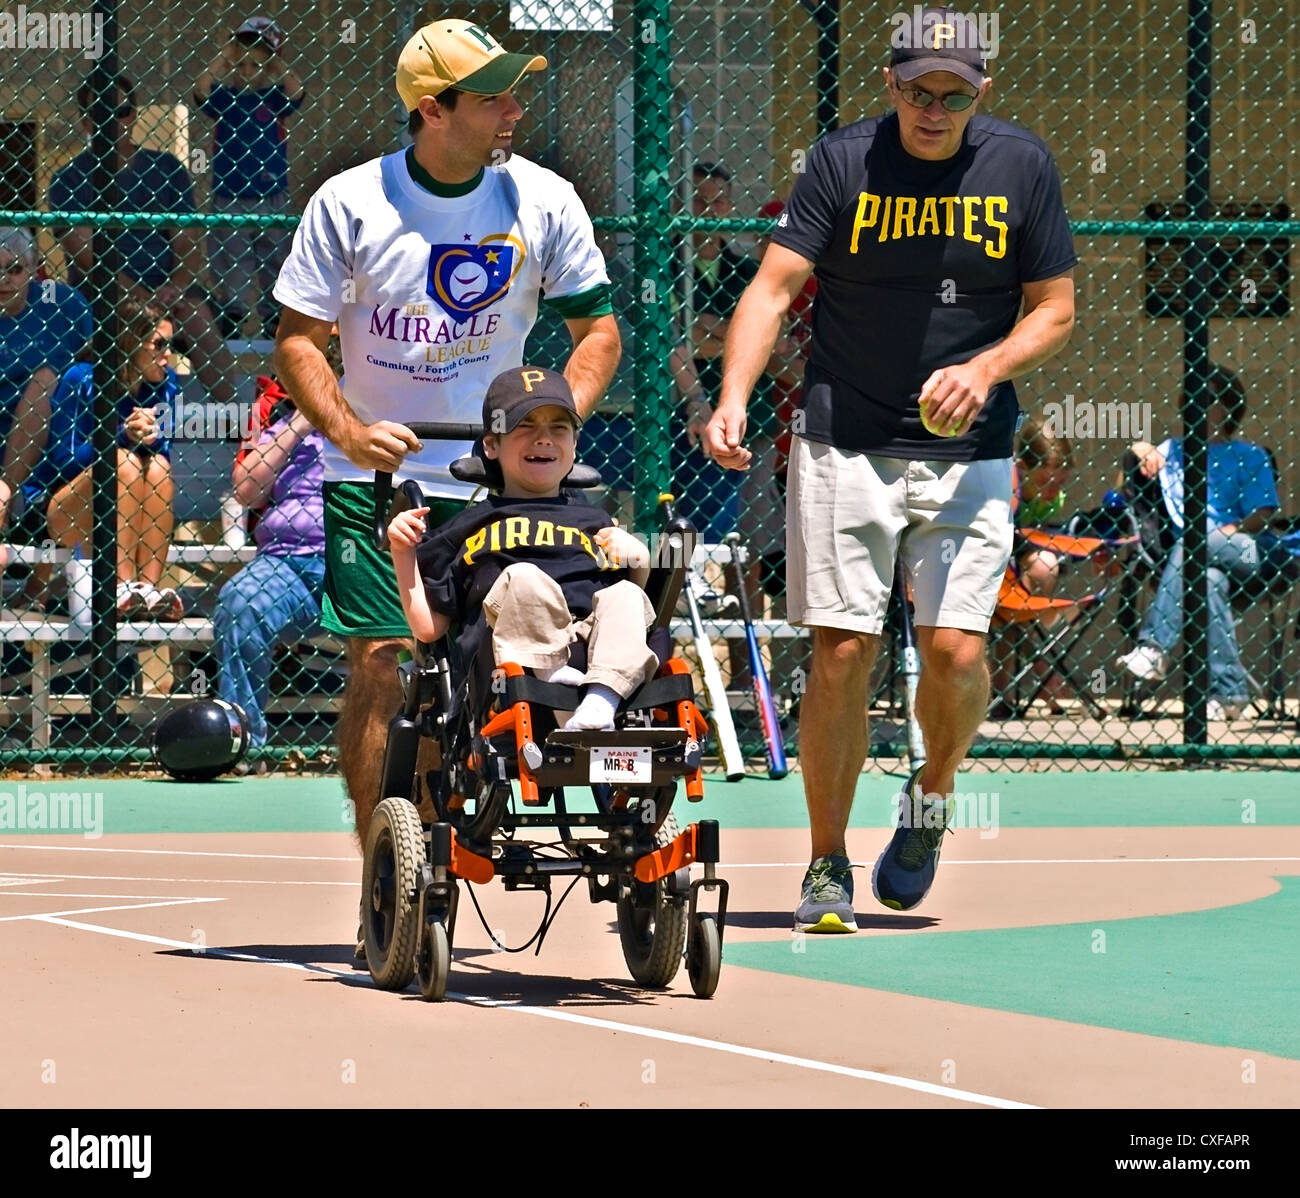 Player and coaches on a softball team in the Miracle League making a run for first base after a hit. Stock Photo